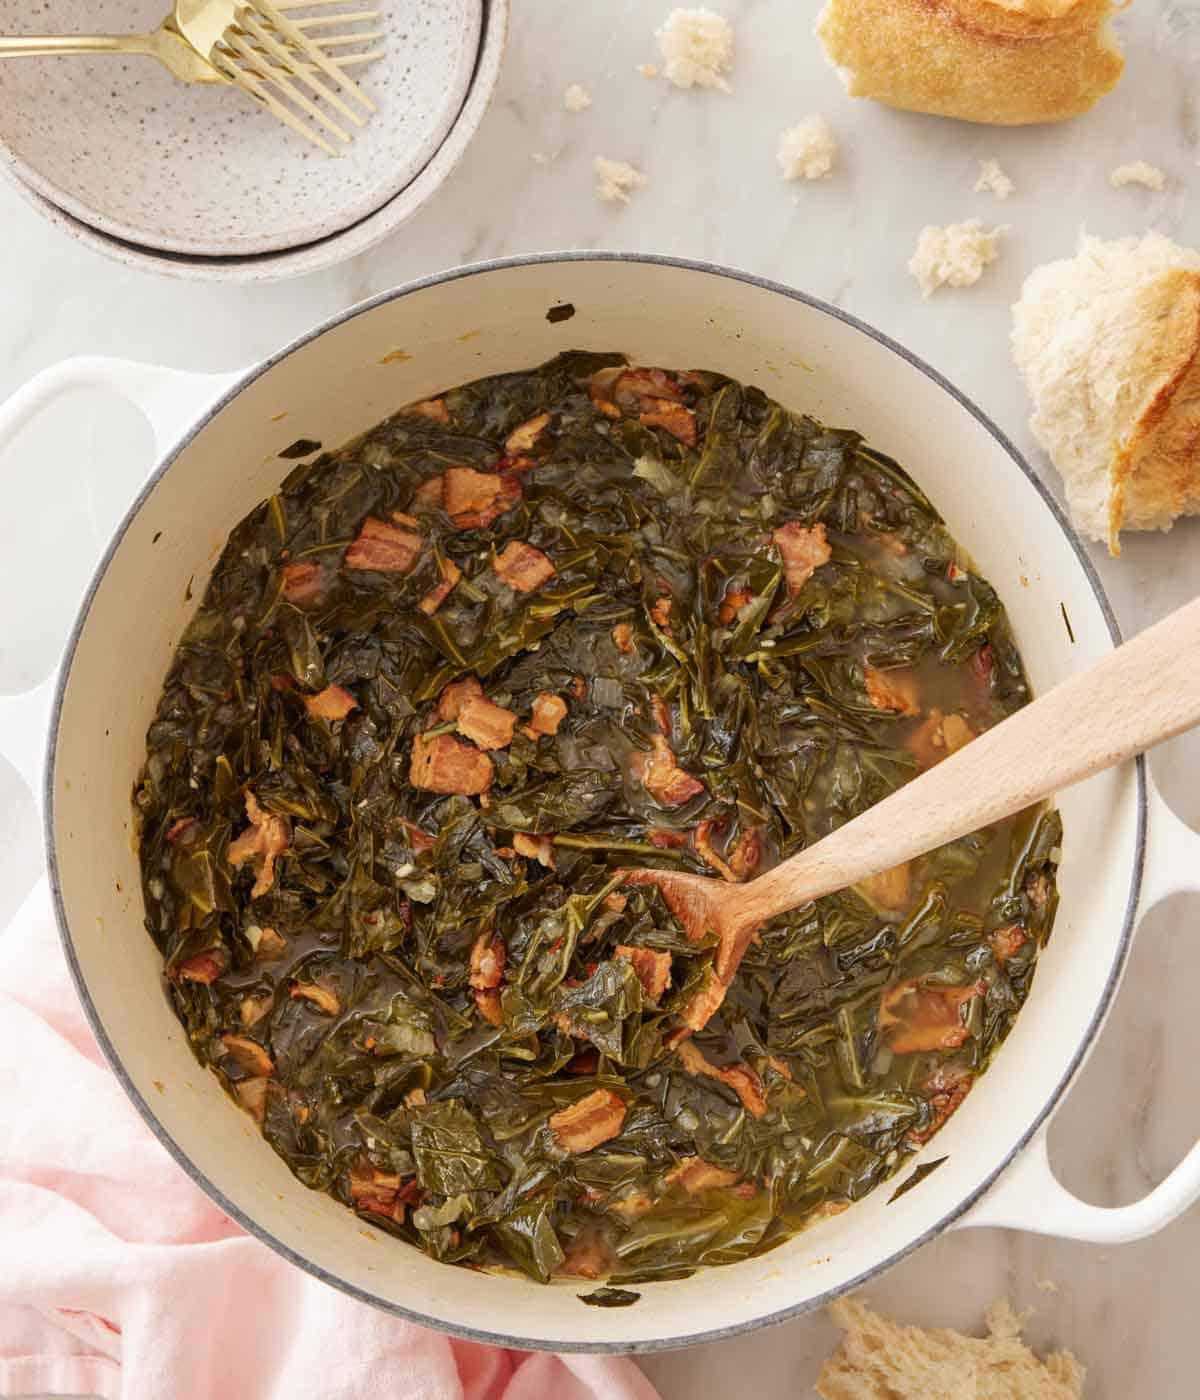 Overhead view of a pot of collard greens with a wooden spoon inside. Torn bread off to the side.